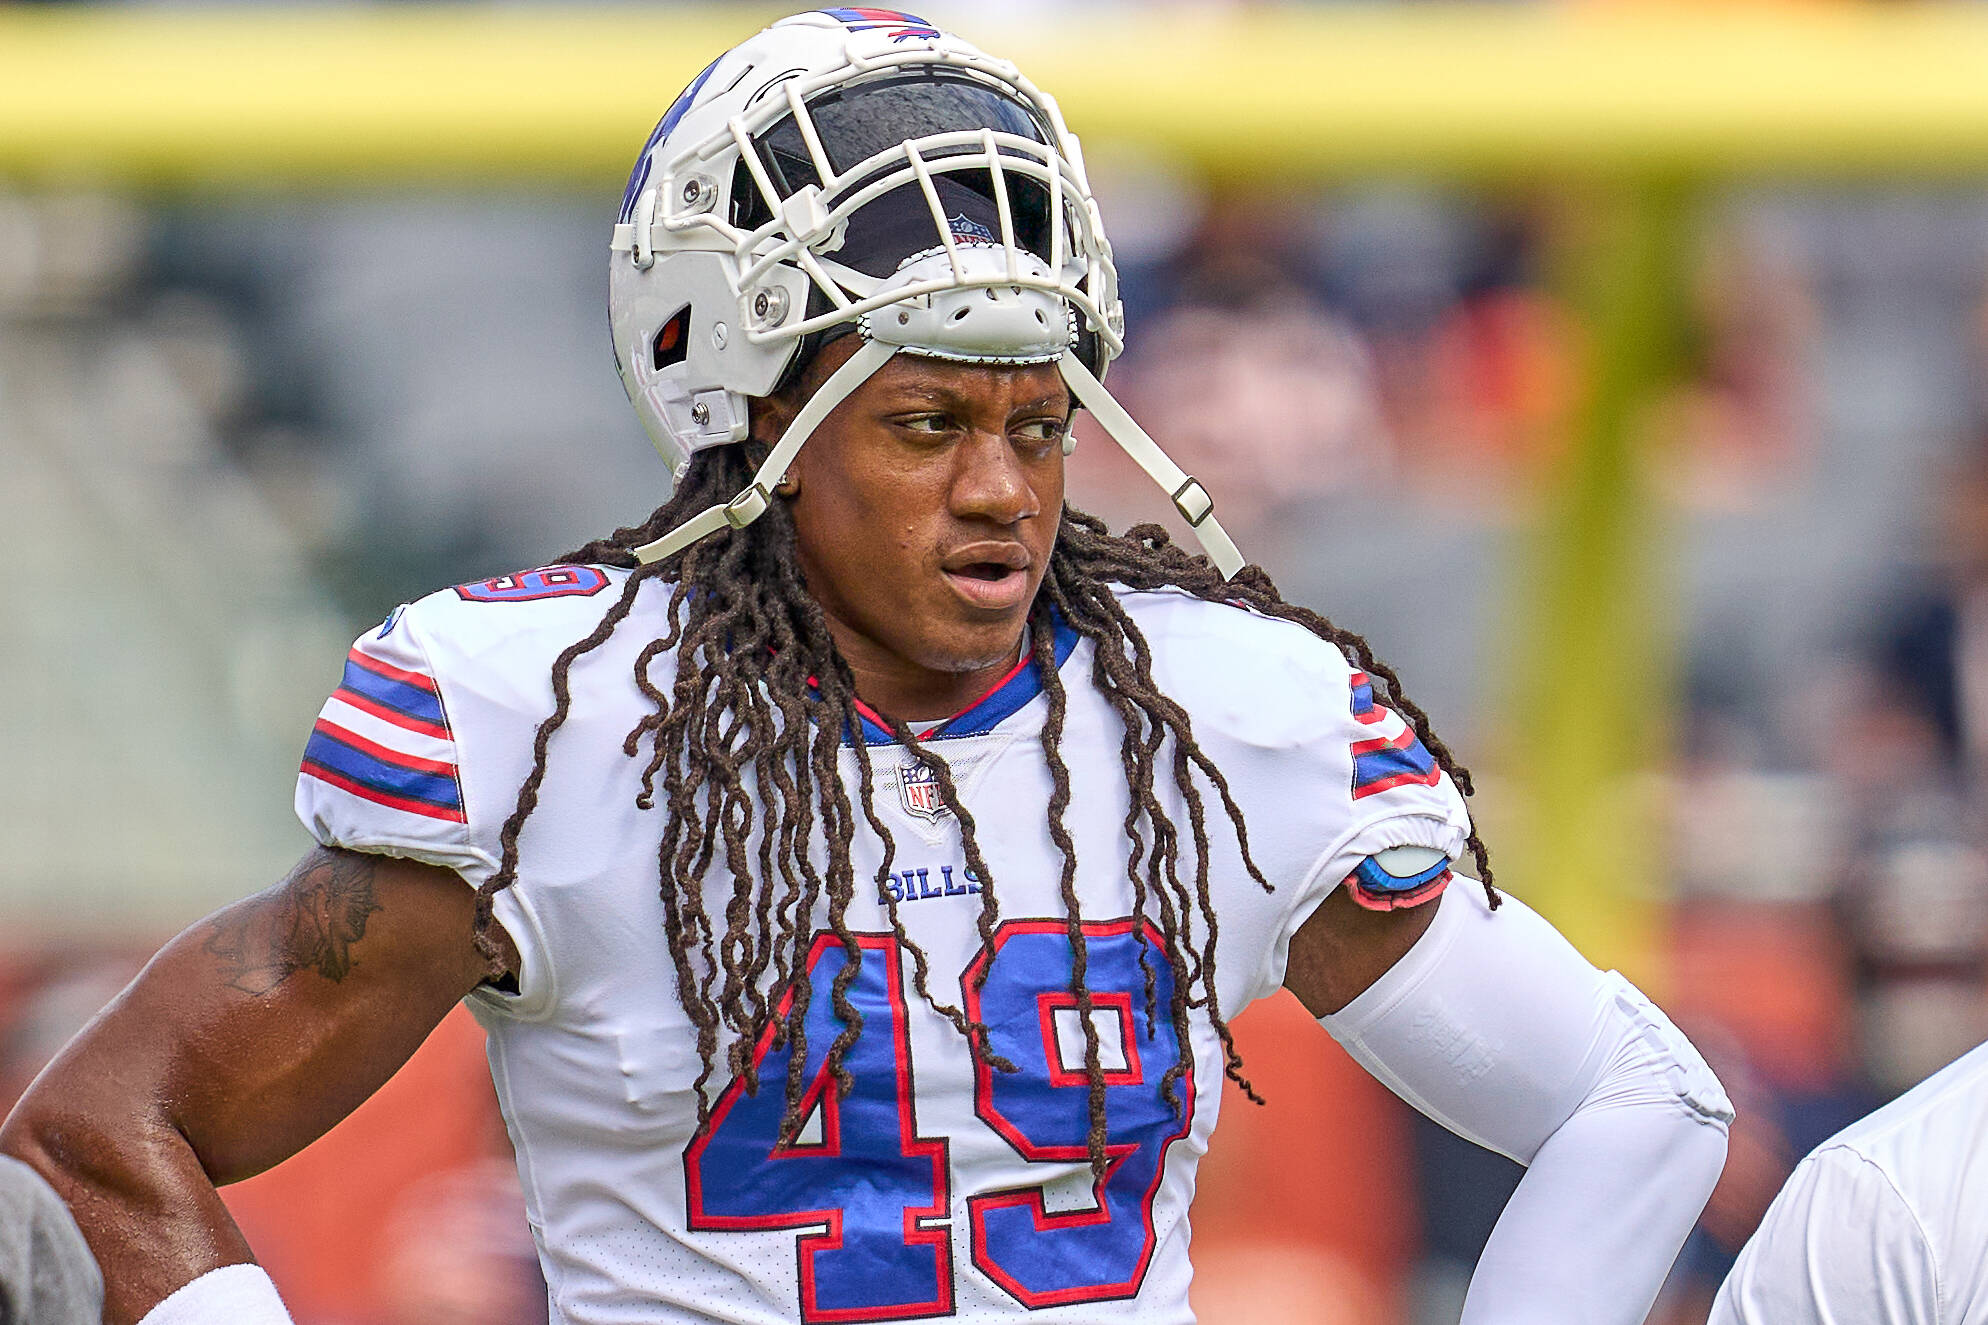 CHICAGO, IL - AUGUST 21: Buffalo Bills middle linebacker Tremaine Edmunds 49 looks on during a preseason game between the Chicago Bears and the Buffalo Bills on August 21, 2021 at Soldier Field in Chicago, IL. Photo by Robin Alam/Icon Sportswire NFL, American Football Herren, USA AUG 21 Preseason - Bills at Bears Icon164210821483